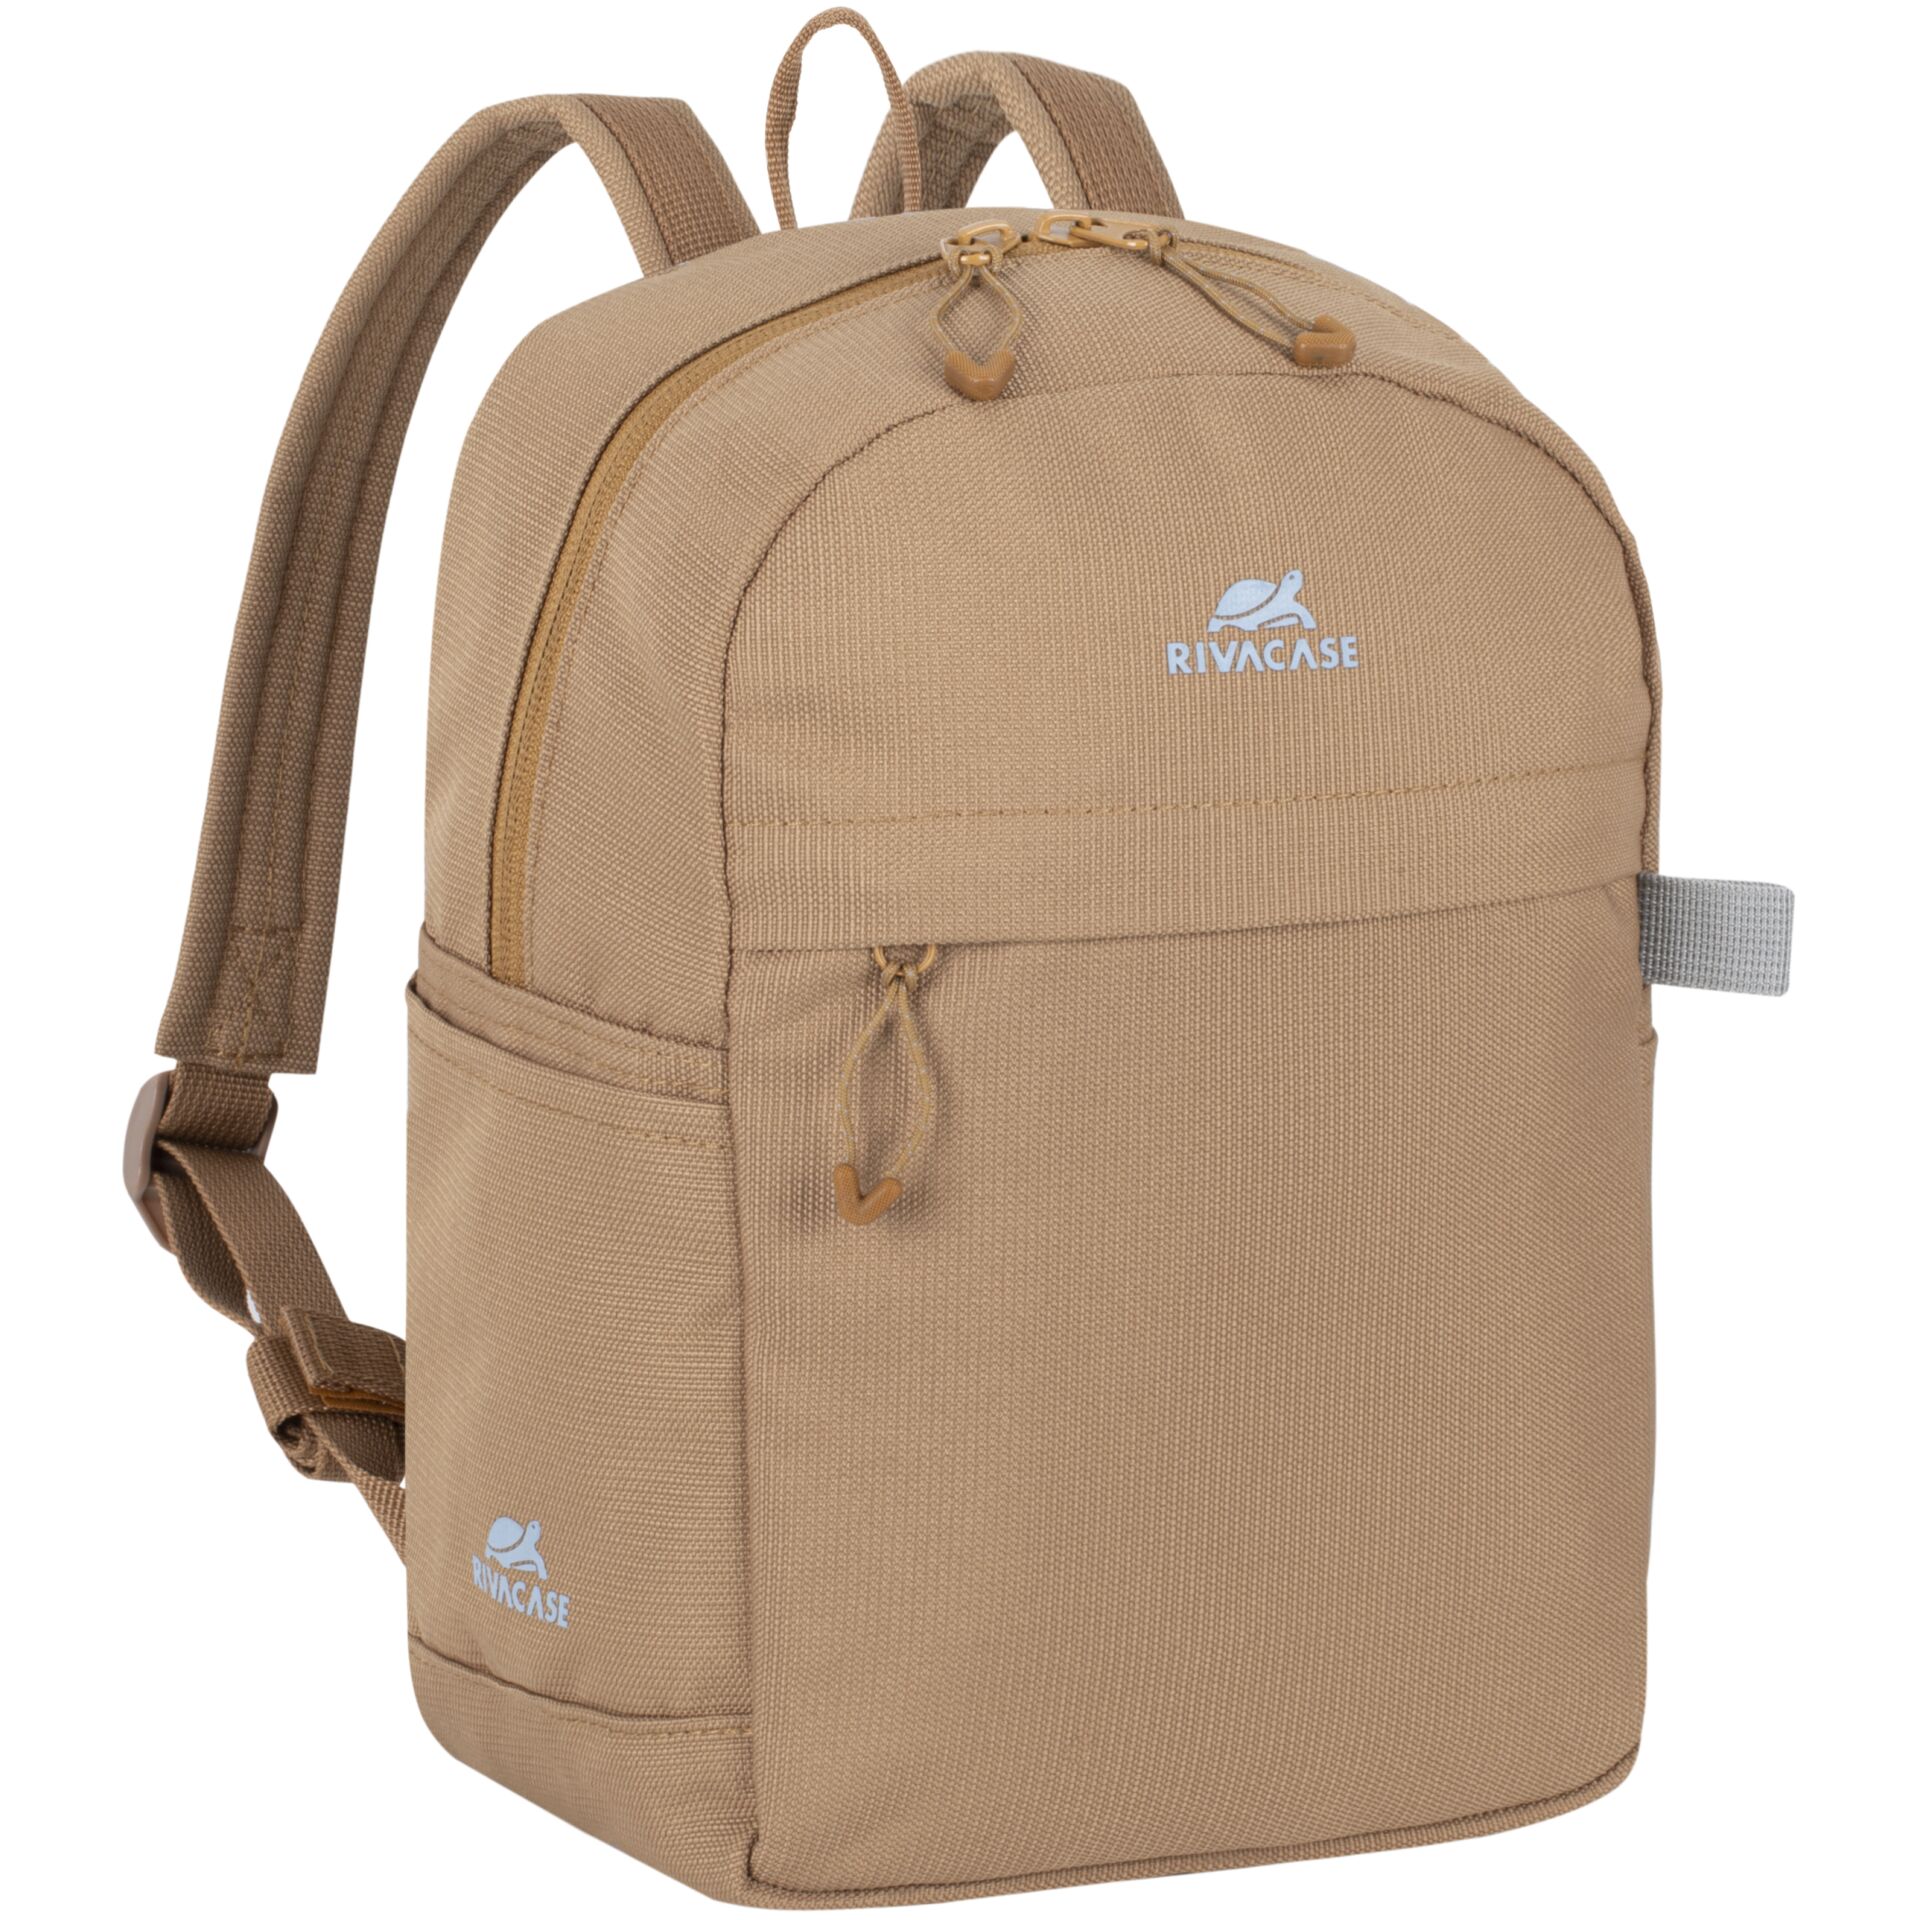 Rivacase 5422 Beige Small Urban Backpack 6l